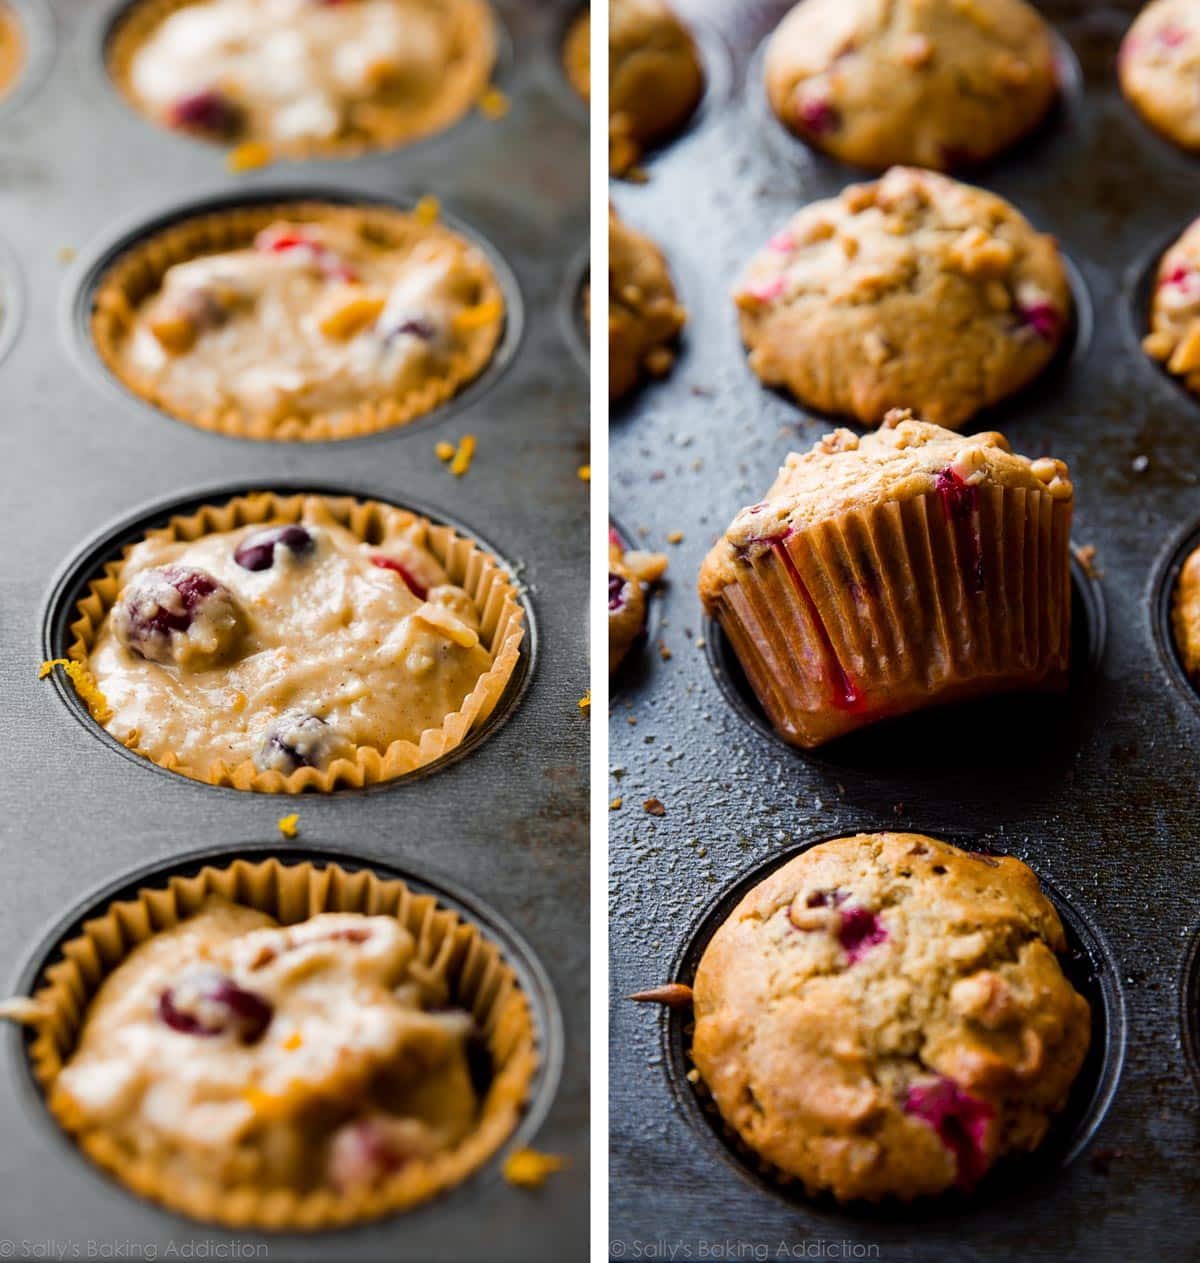 2 images of muffin batter in a muffin pan and baked muffins in a muffin pan